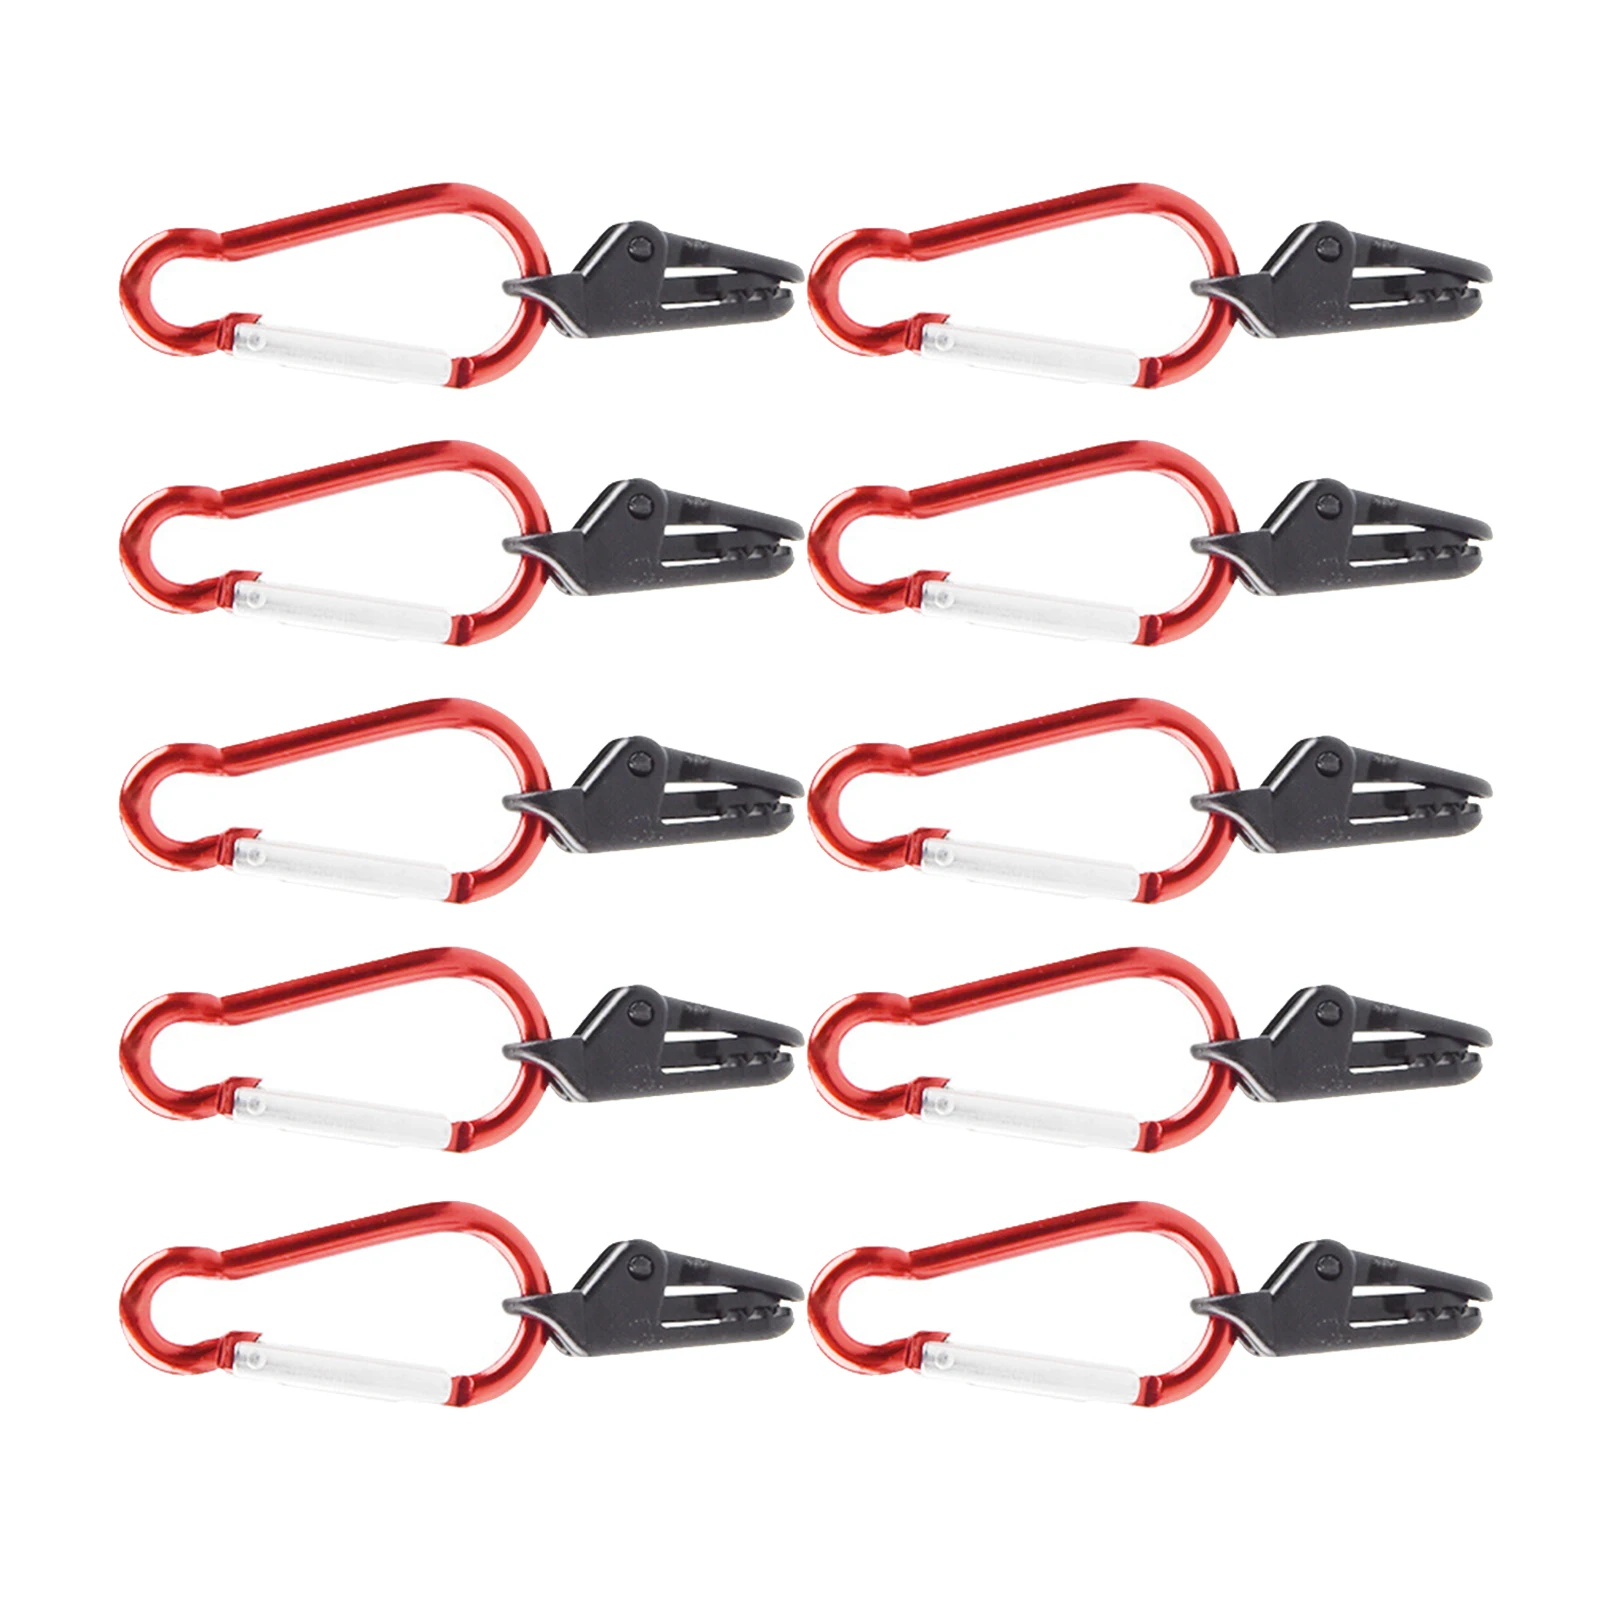 10pcs Heavy Duty Tarp Clips Tent Clamps Holding Up Alligator Mouth Buckle